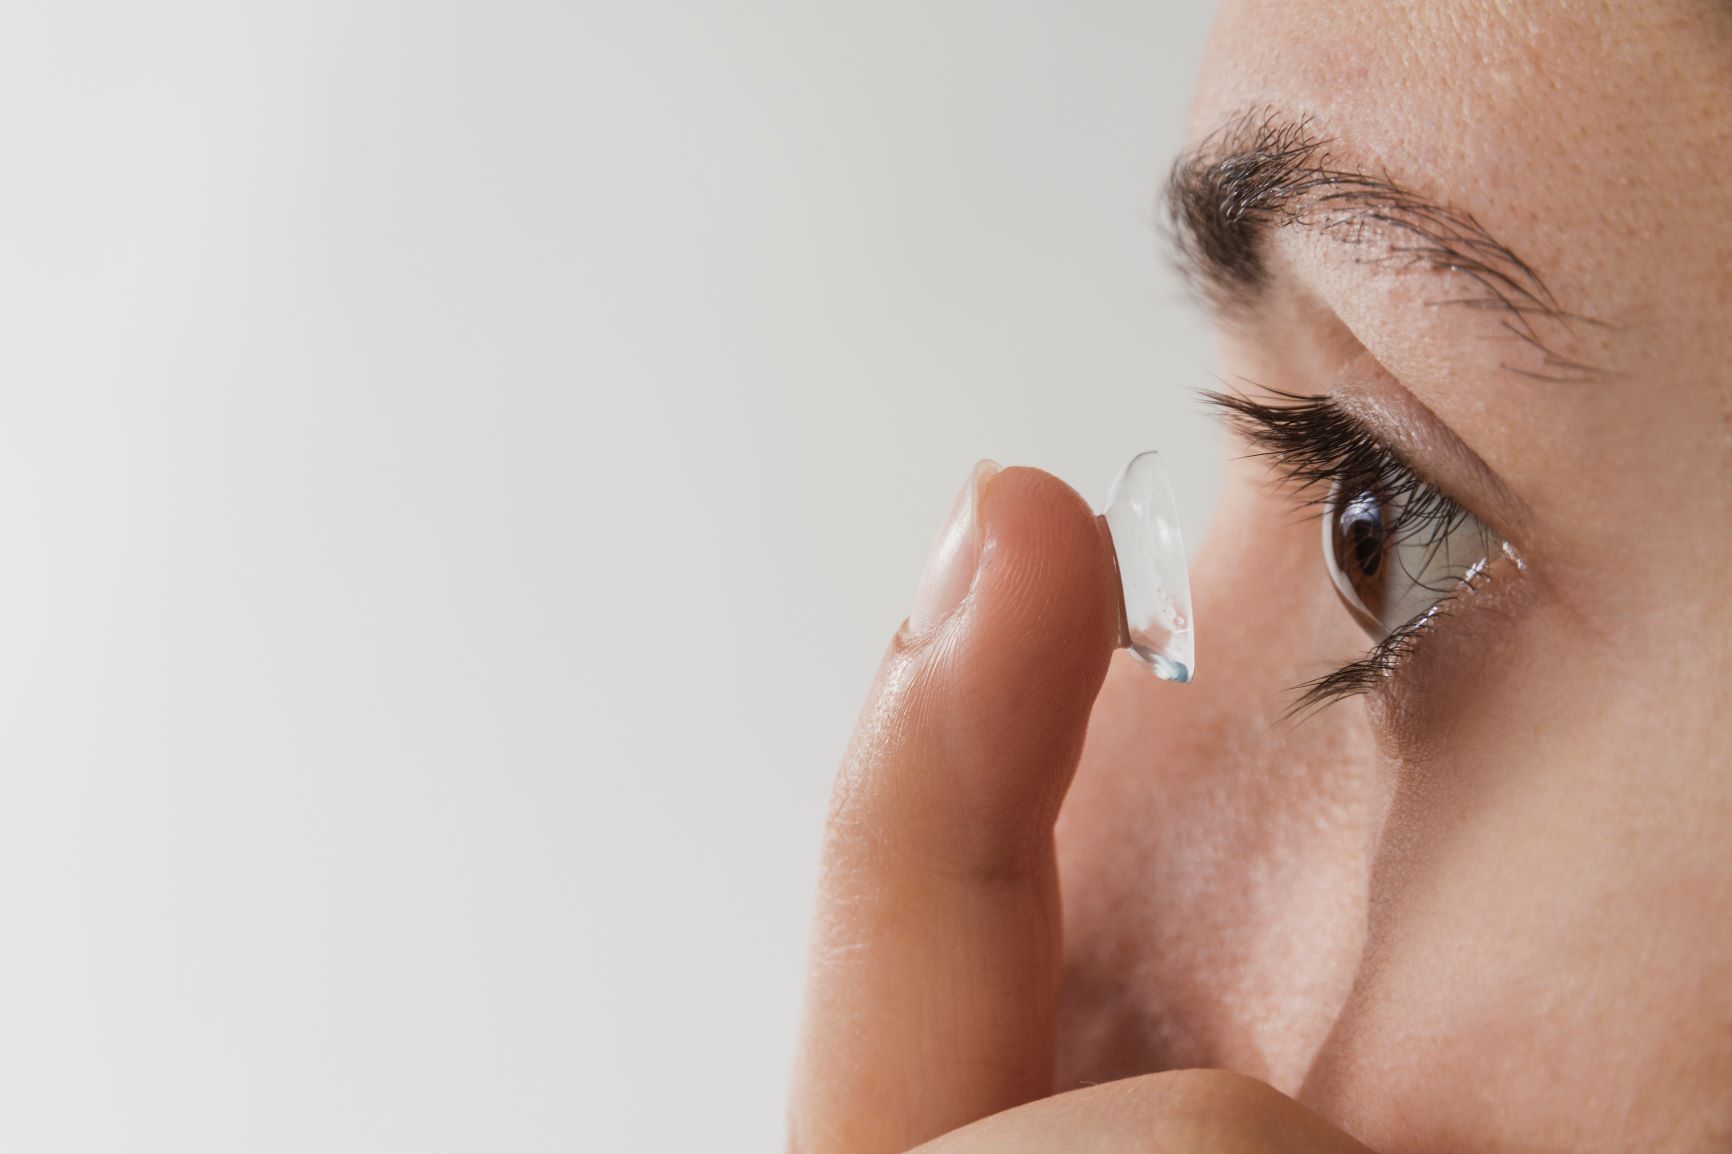 Contact Lens for Astigmatism